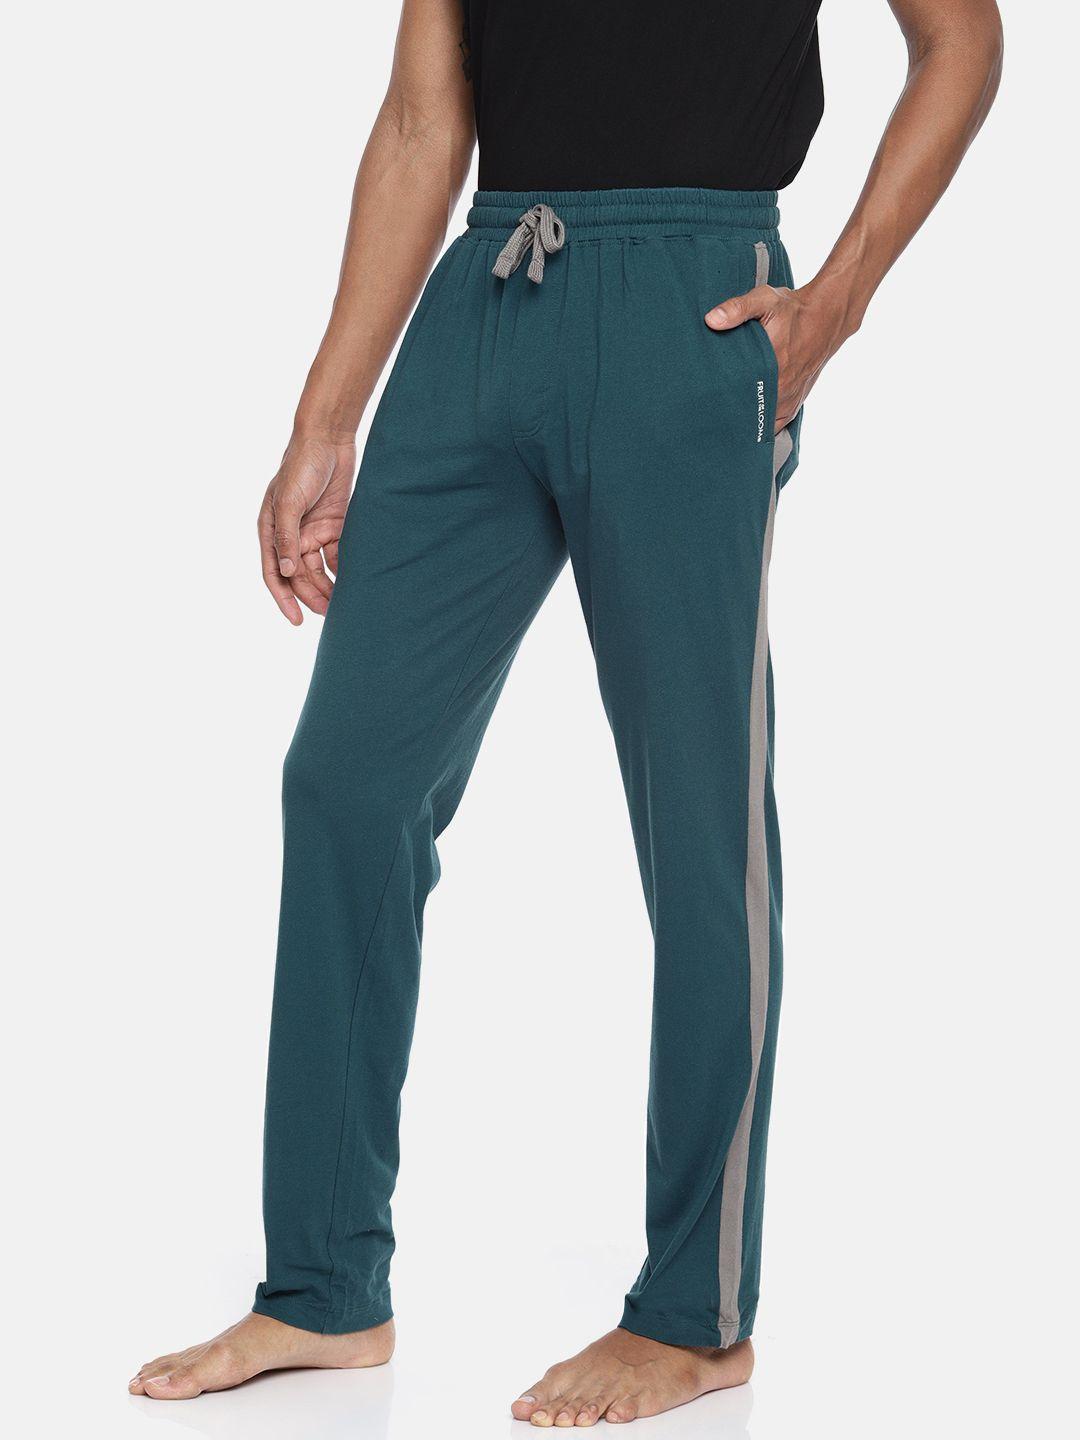 fruit of the loom men teal blue solid knit lounge pants mkp02-a1s4